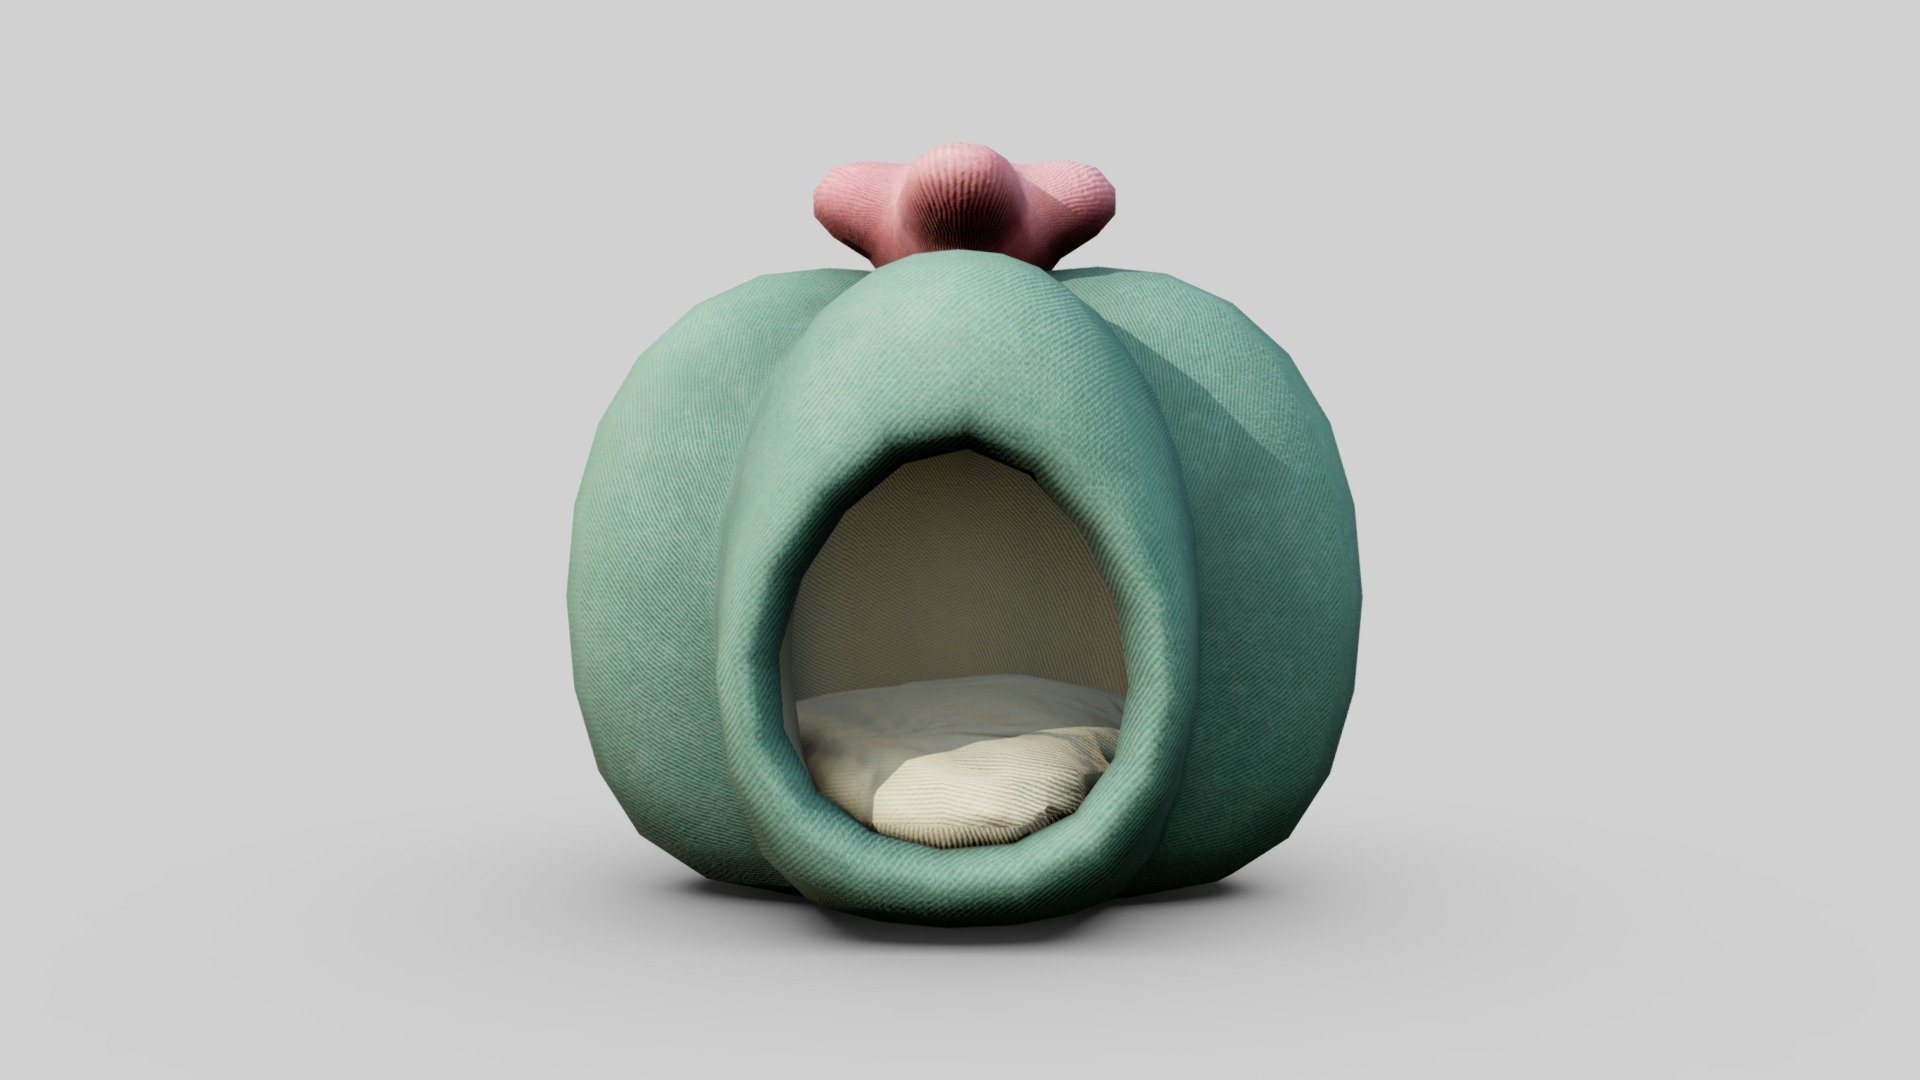 Cactus Pet Bed for your renders and games

Textures:

Diffuse color, Roughness, Normal, AO

All textures are 2K

Files Formats:

Blend

Fbx

Obj - cactus pet bed - Buy Royalty Free 3D model by Vanessa Araújo (@vanessa3d) 3d model